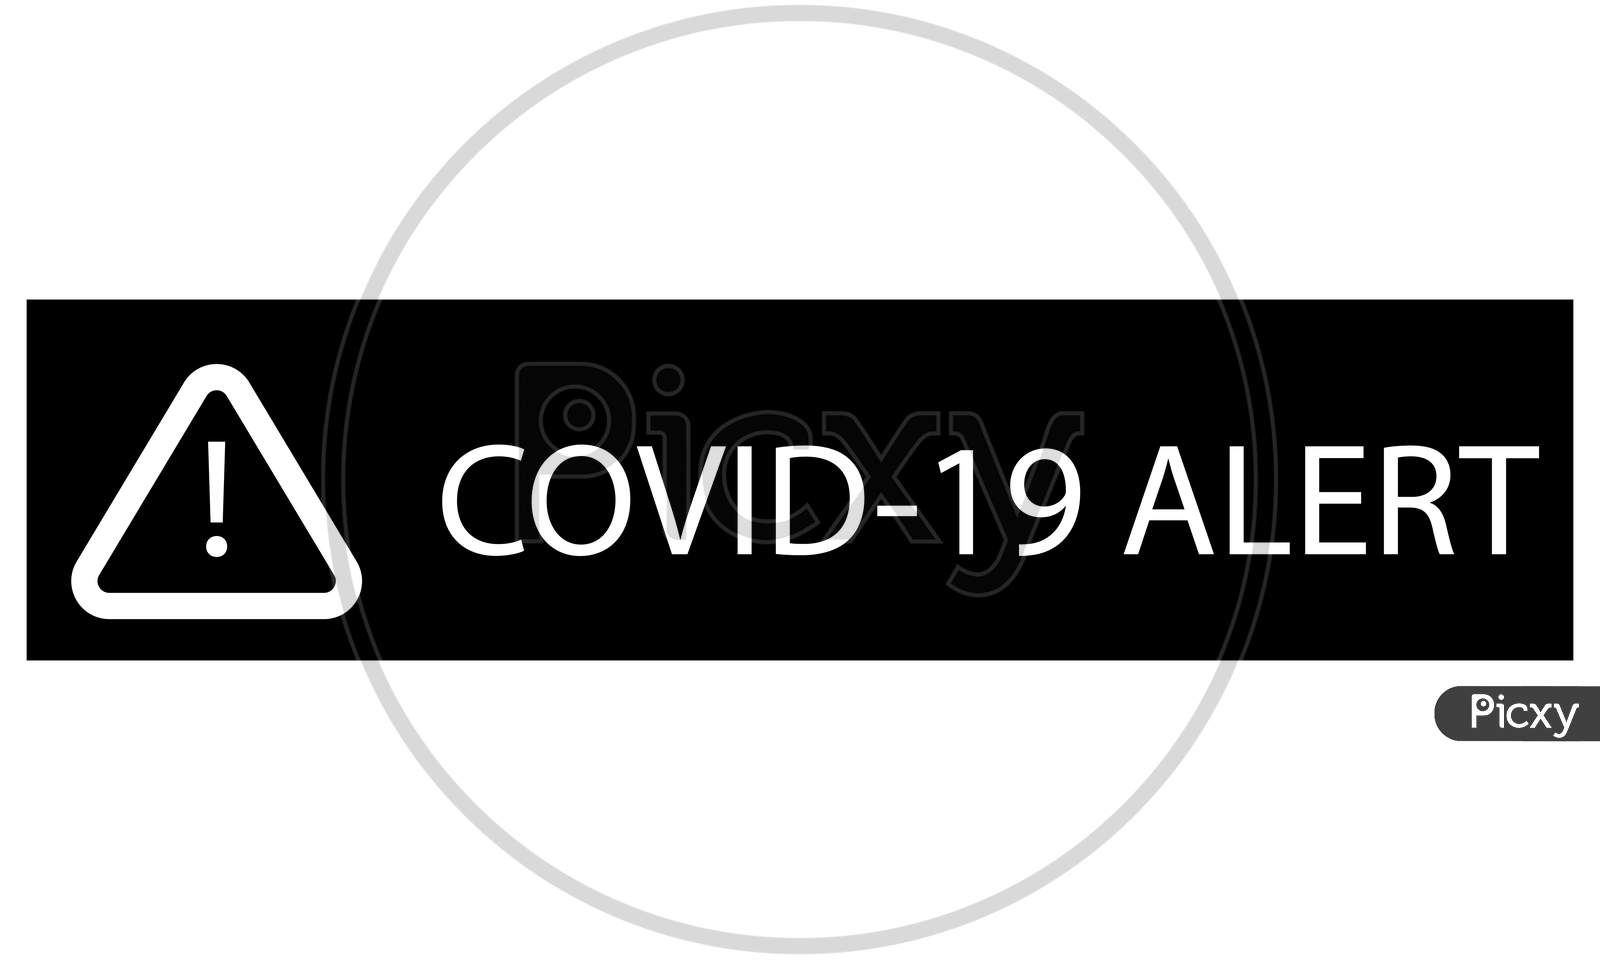 Coronavirus Alert Icon. Covid-19 Alert Stripe. Stop Covid-19. Stop Coronavirus. Coronavirus Warning Sign. Danger Of Infection Covid-19 Sing Concept. Vector Illustration Isolated On White Background.